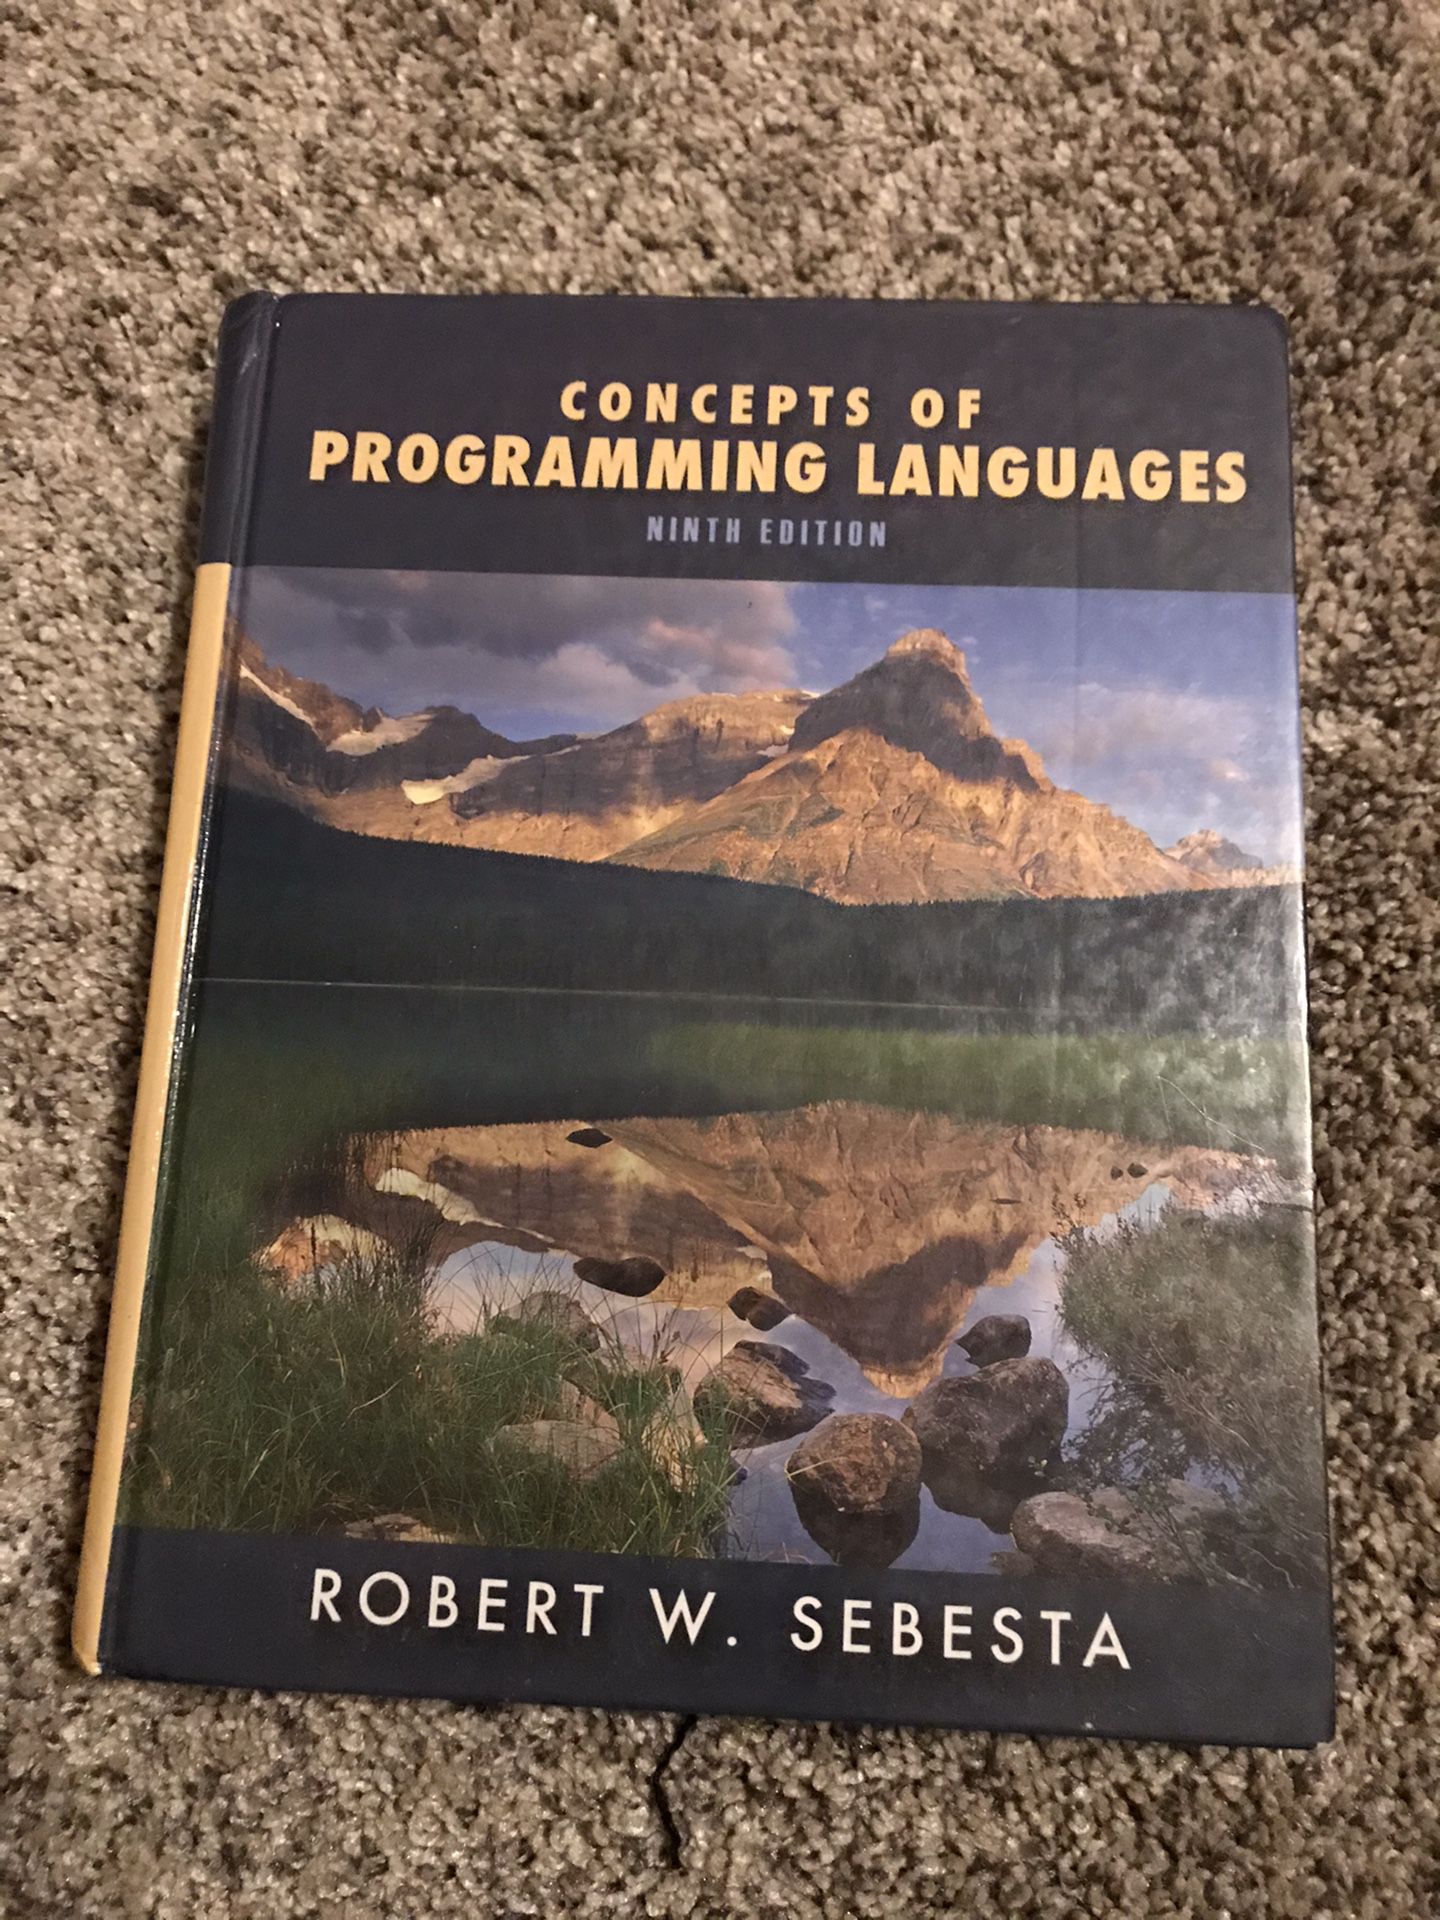 Concepts of Programming Languages Ninth Edition by Robert Sebesta